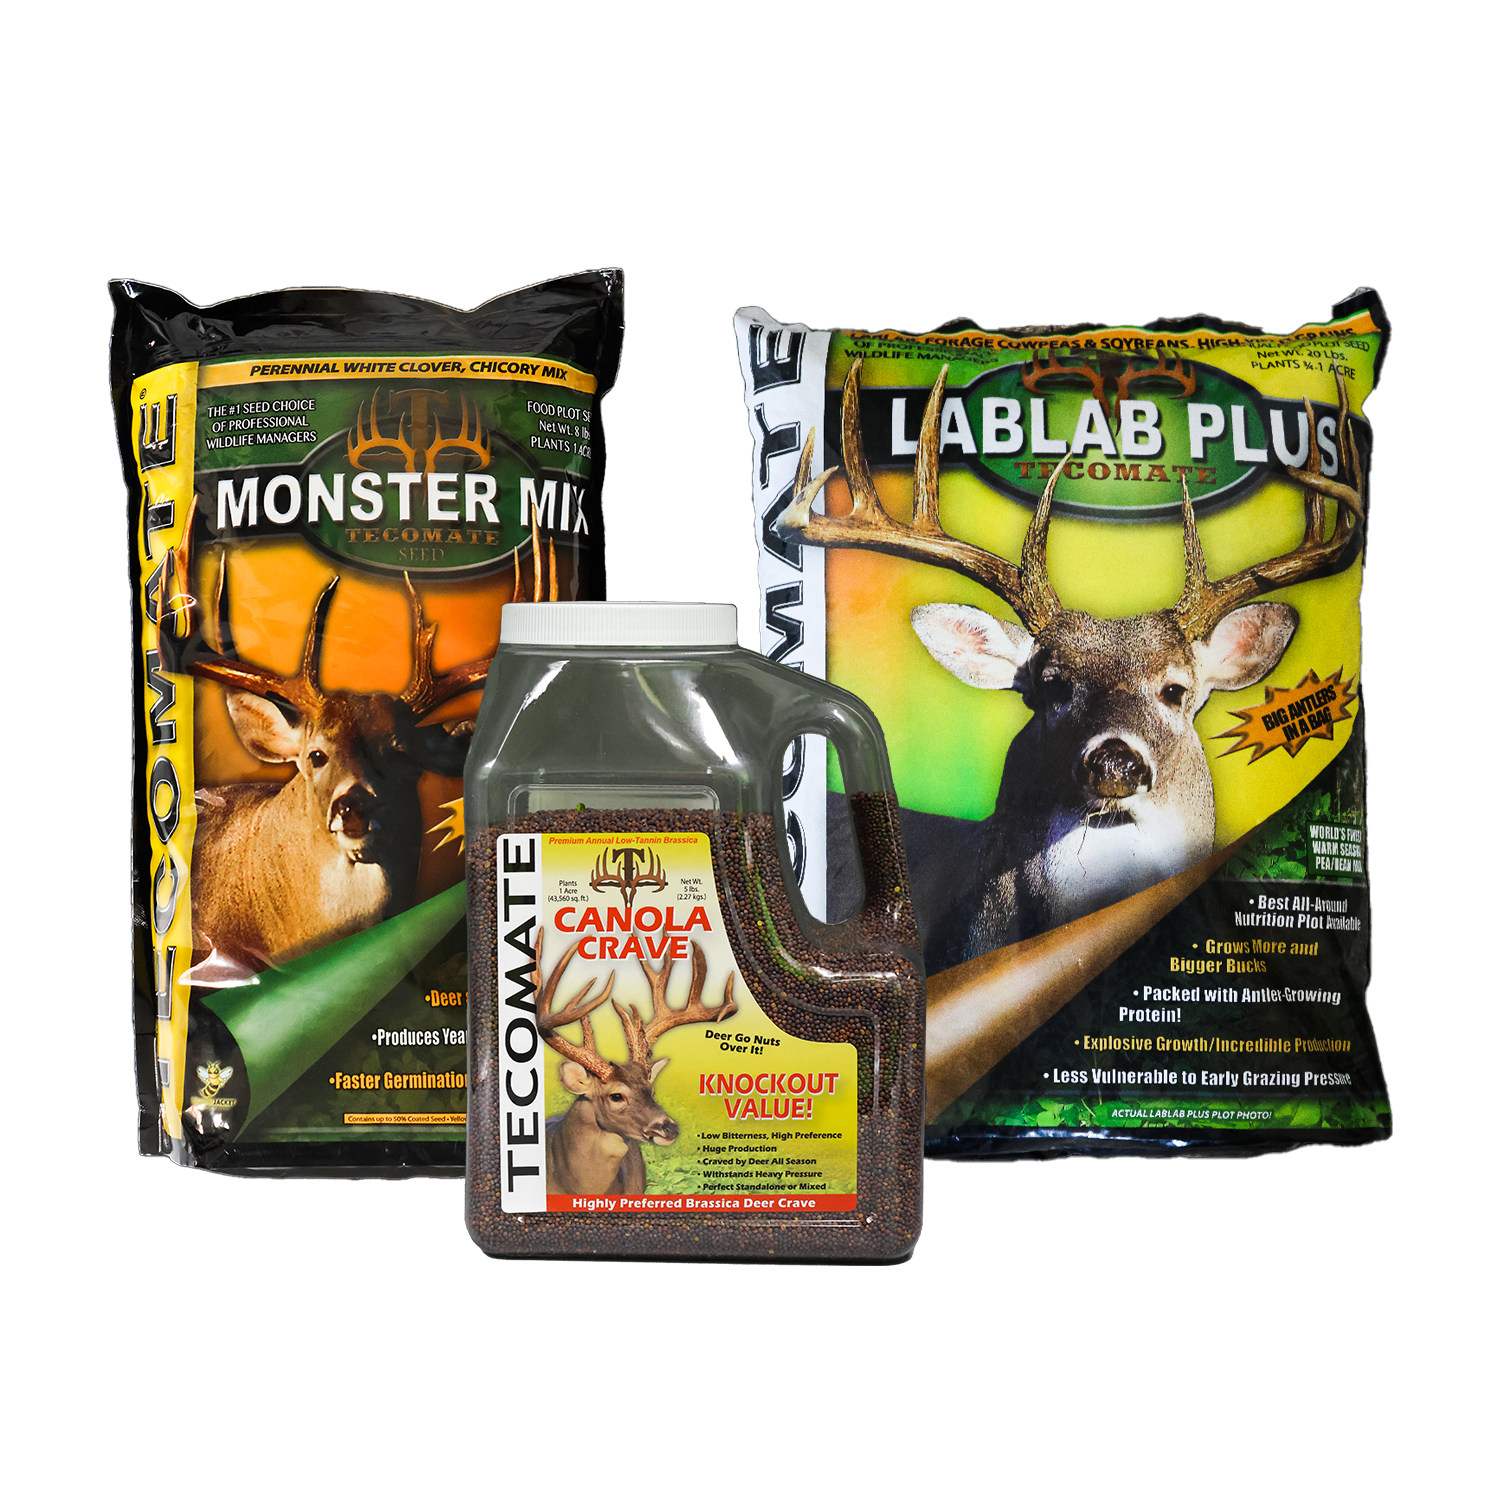 All Food Plot Seed Products